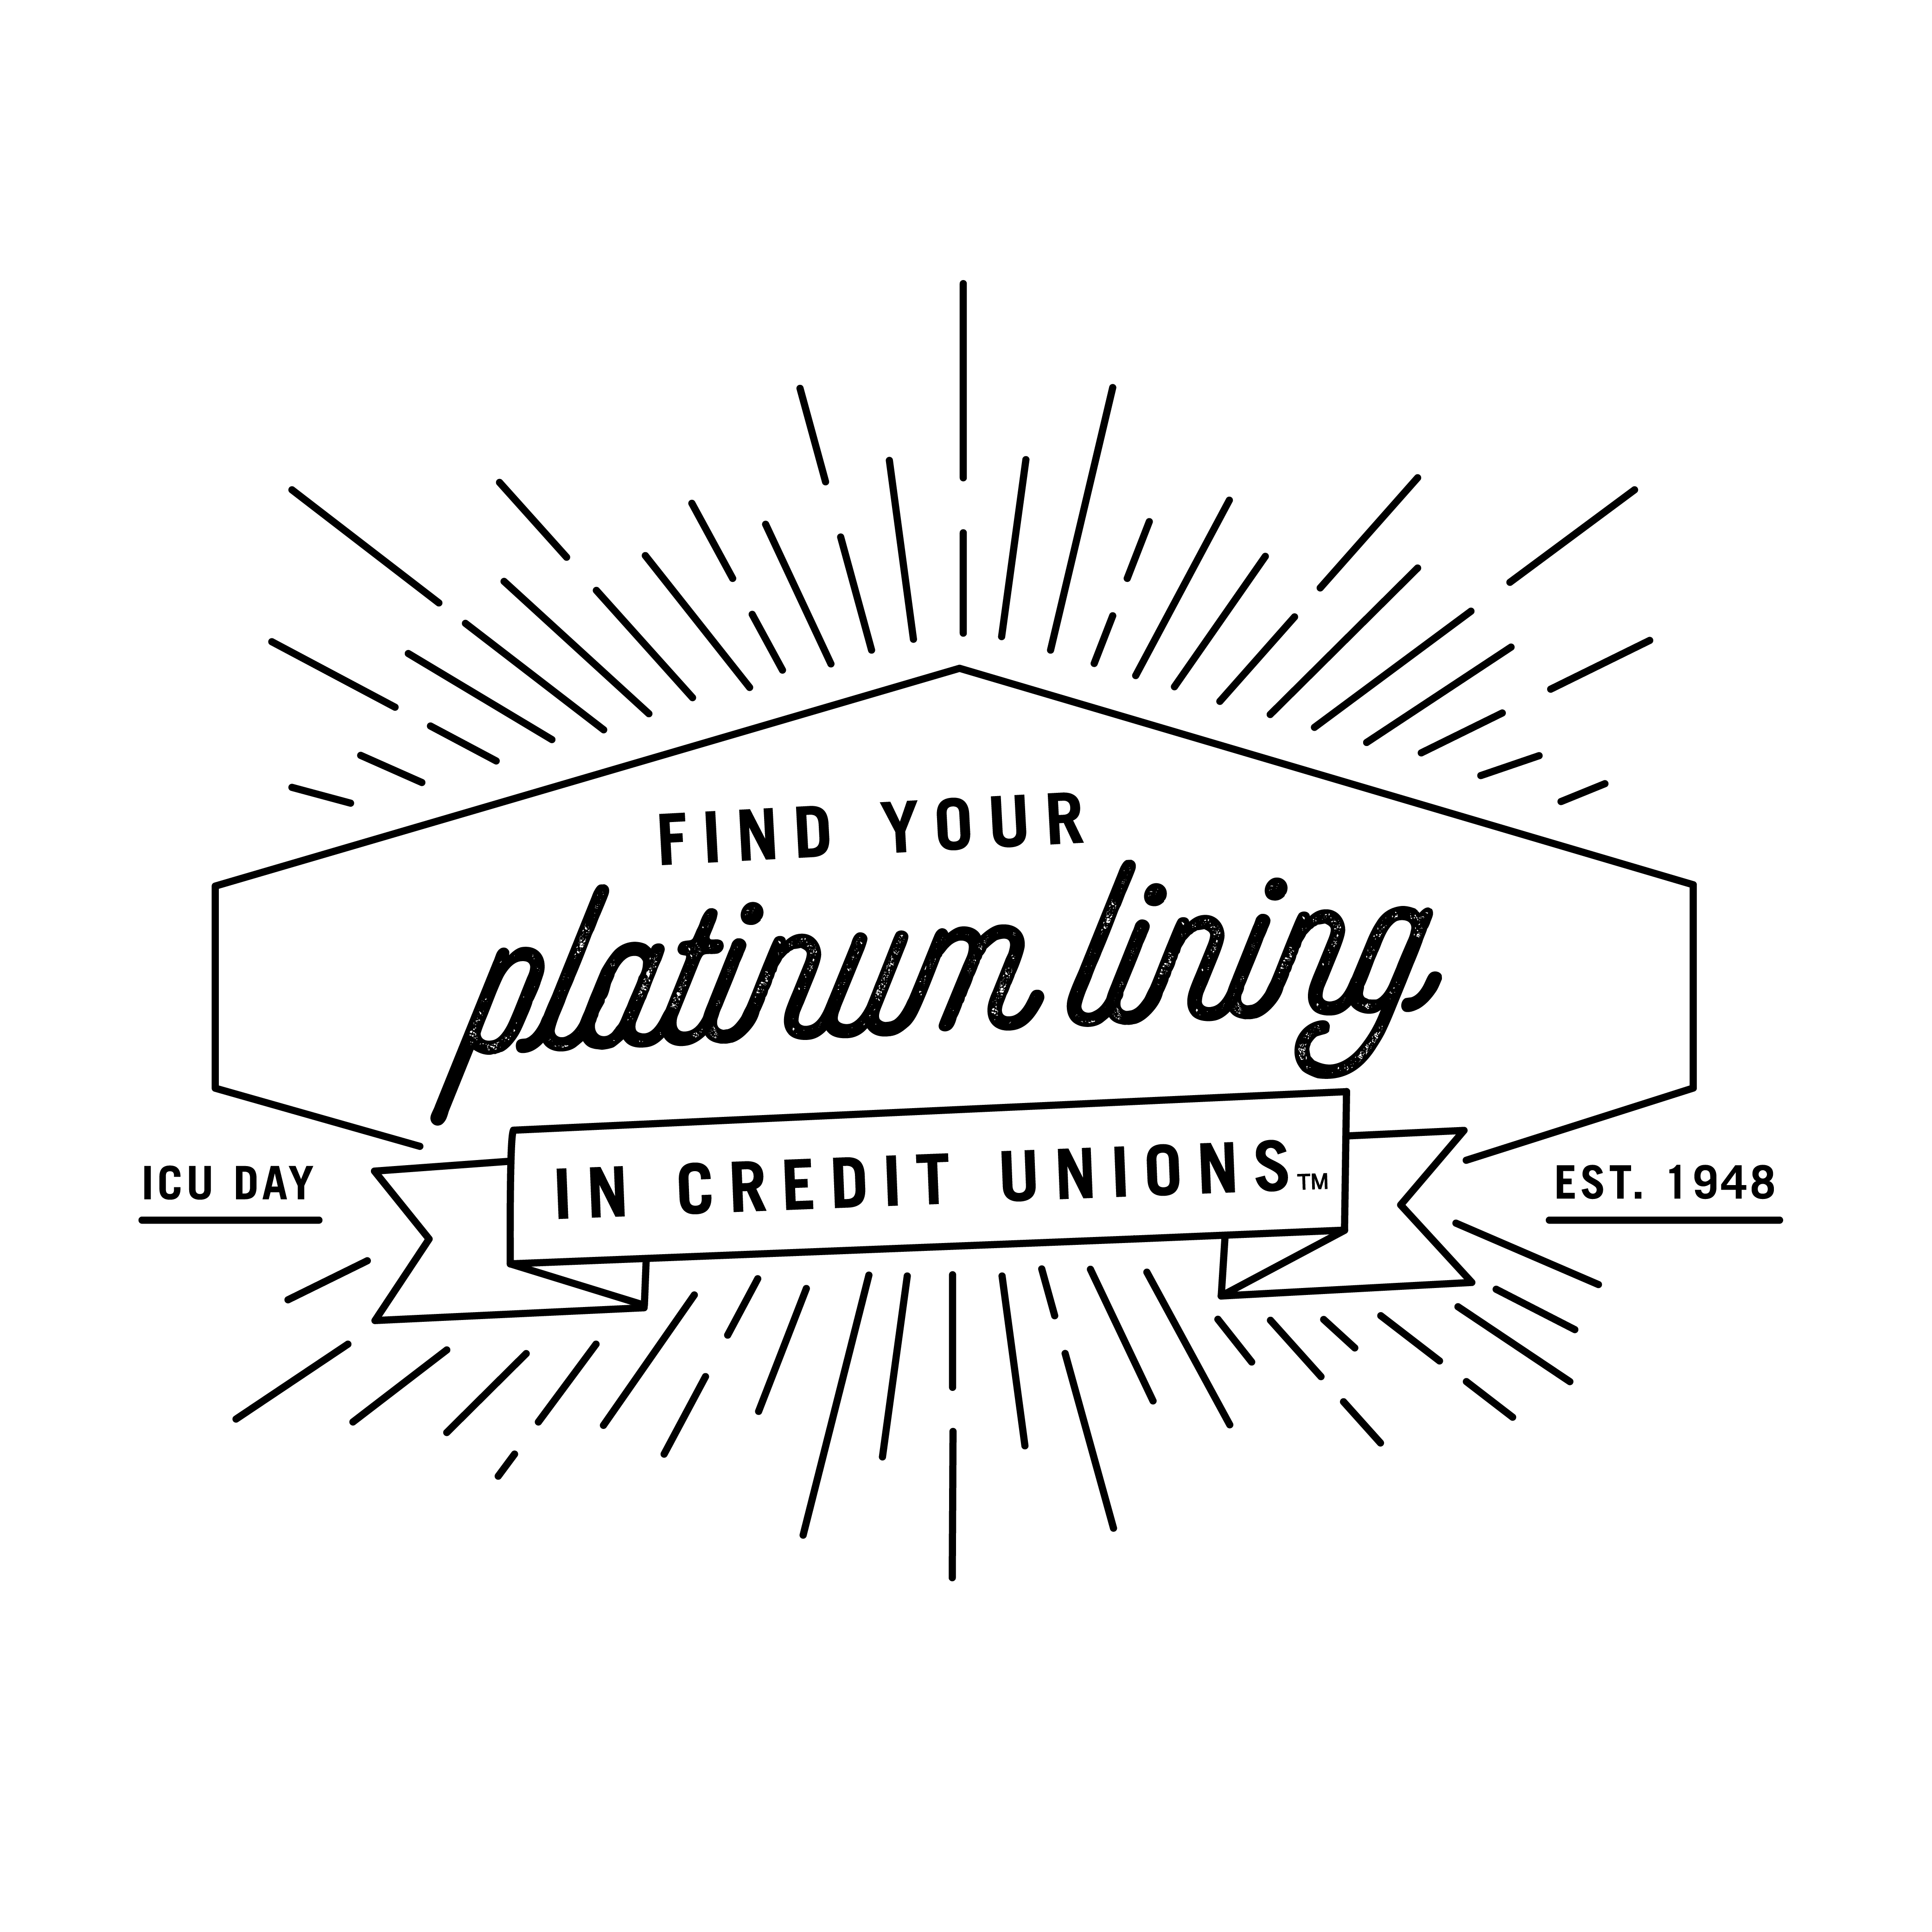 Find your platinum lining in credit unions